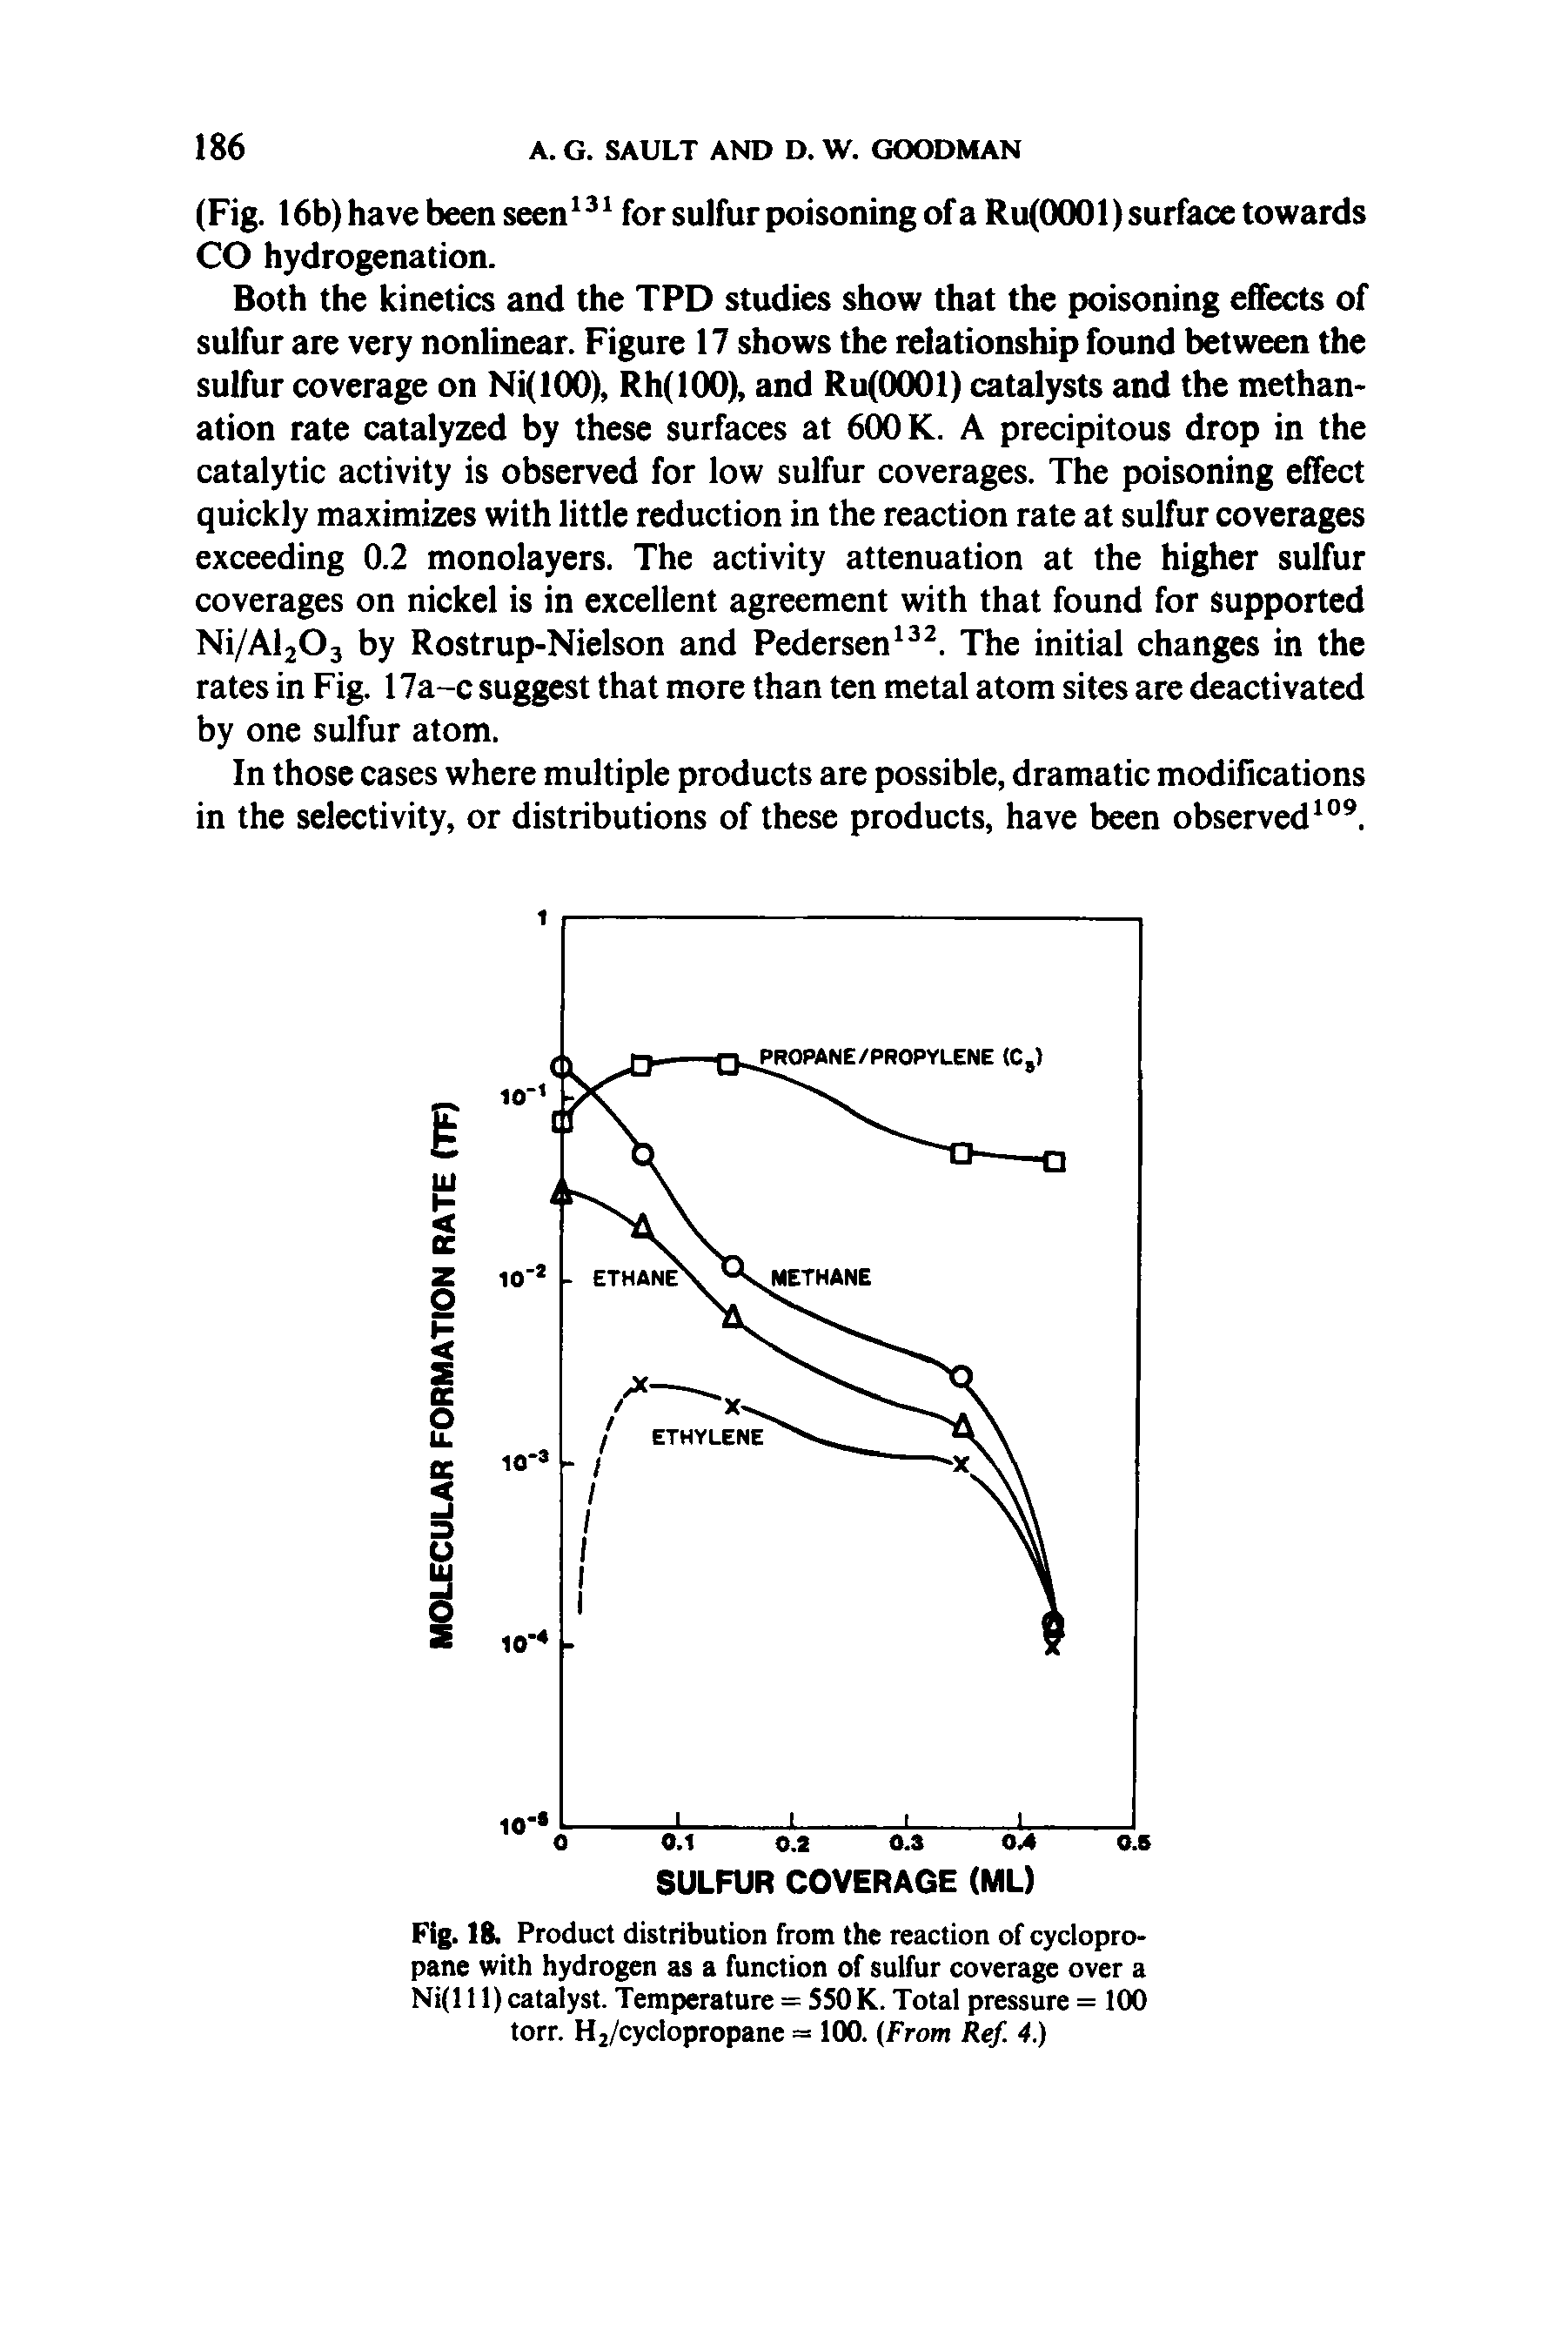 Fig. 18. Product distribution from the reaction of cyclopropane with hydrogen as a function of sulfur coverage over a Ni(l 11) catalyst. Temperature = 550K. Total pressure = 100 torn Hj/cyclopropane = 100. From Ref. 4.)...